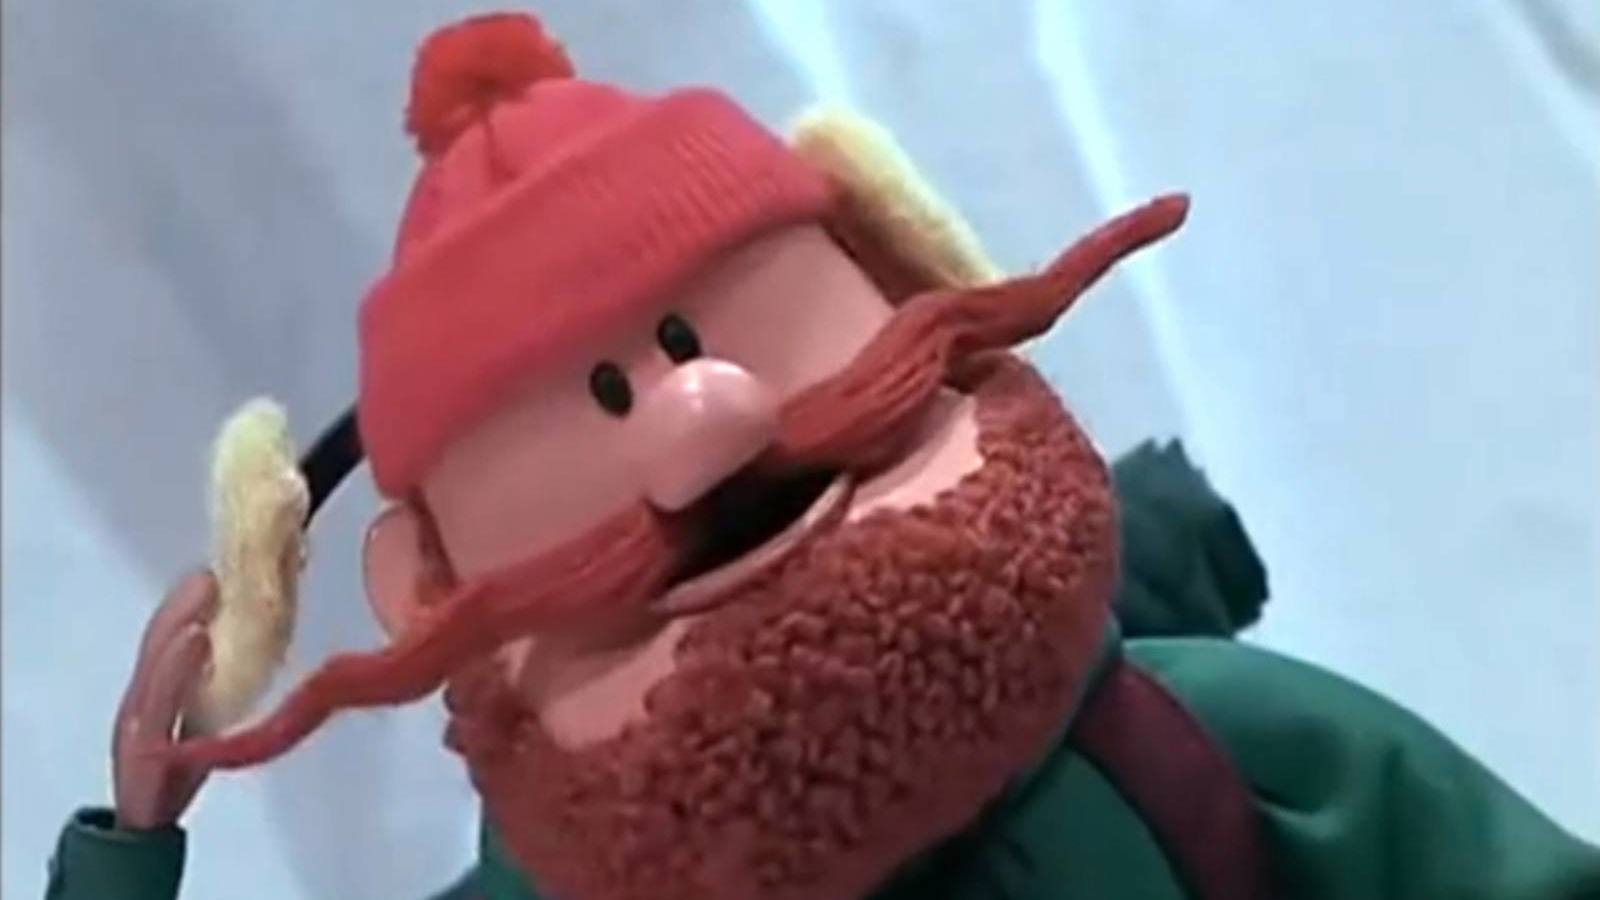 The Real Reason Yukon Cornelius Licked His Pickaxe In Rudolph The Red-Nosed...